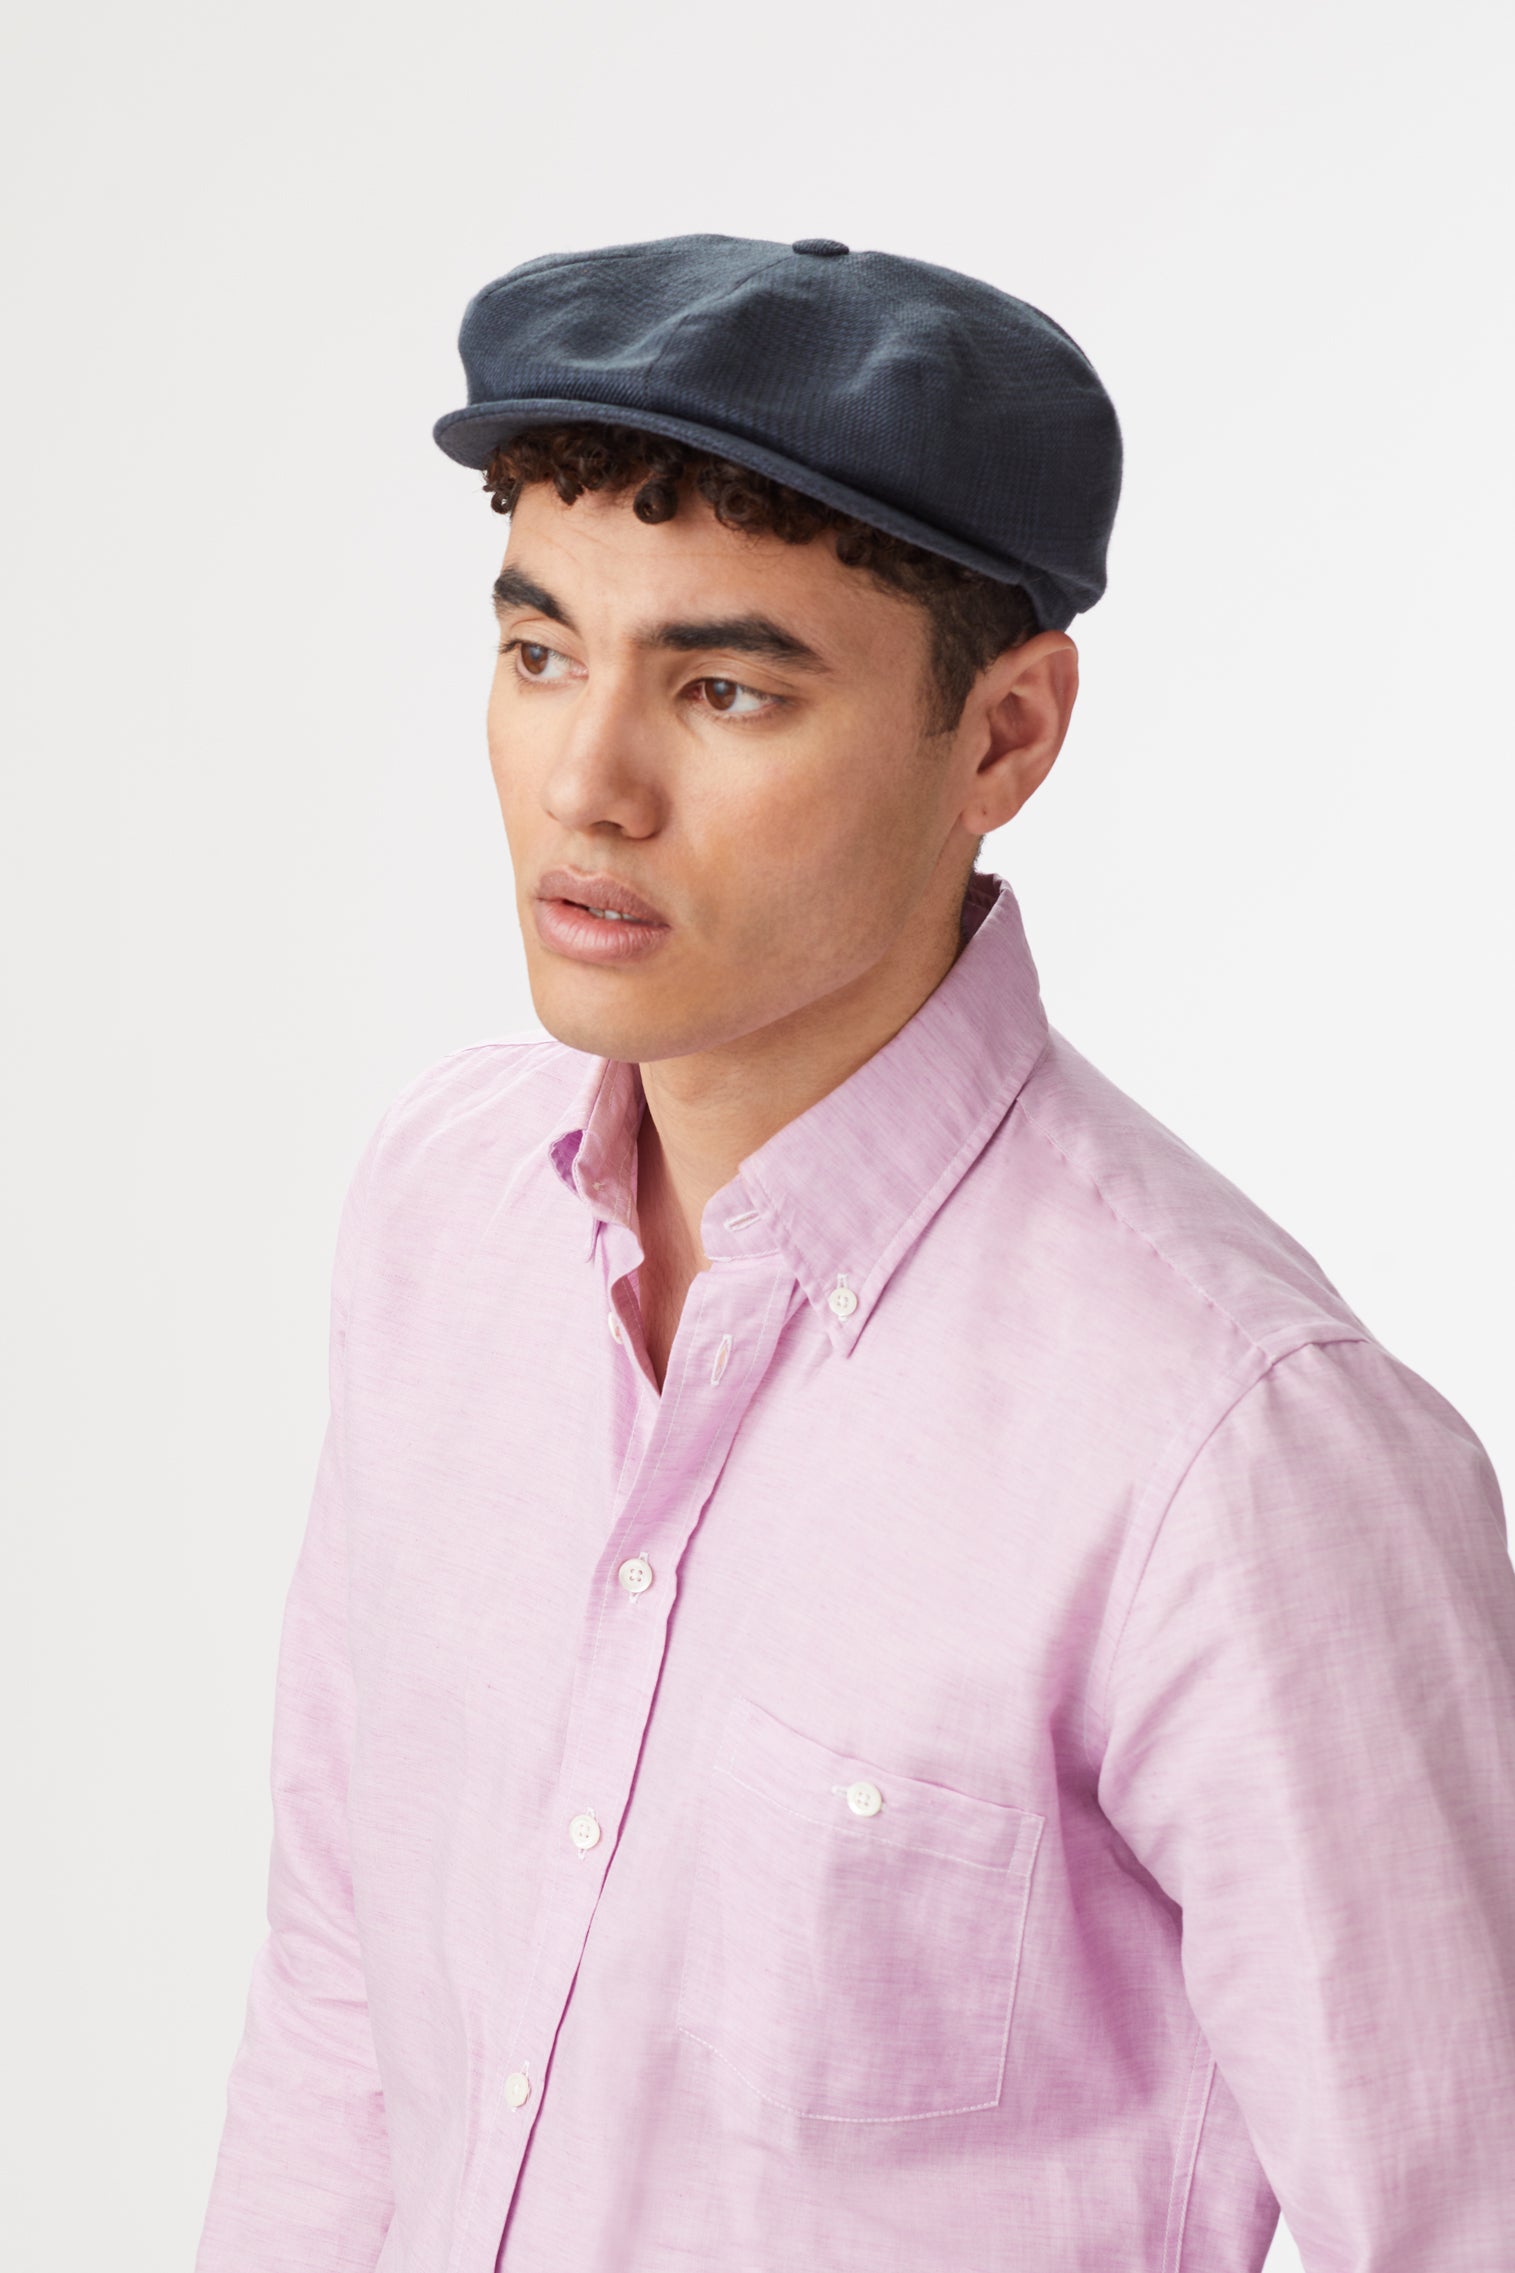 Tremelo Linen Navy Check Bakerboy Cap - Hats for Tall People - Lock & Co. Hatters London UK